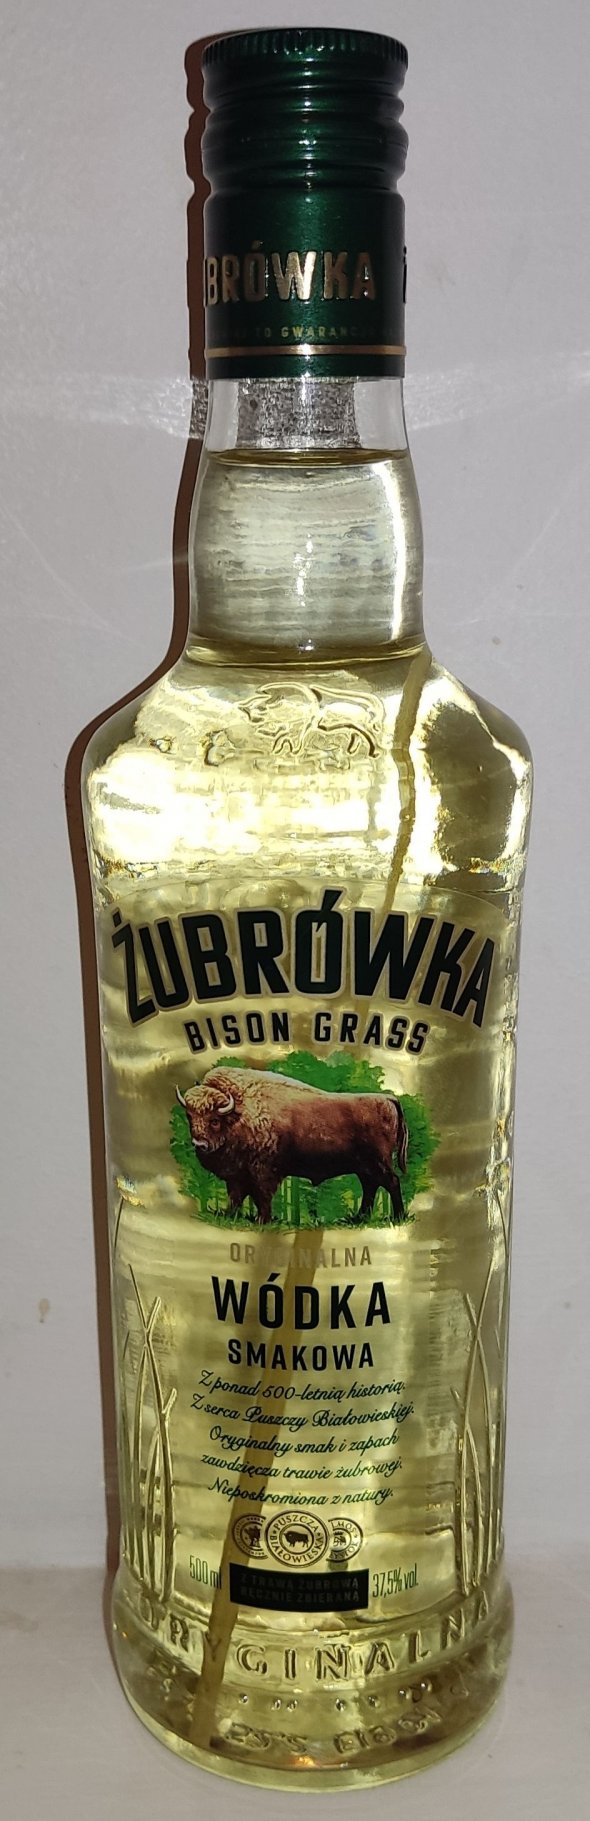 Zubrowka Bison Grass Vodka (Abv 37.5%) :: Fine Wine Marketplace, Rare Wine,  Bin Ends and Vintage Wine. Buy and sell wine directly with other users